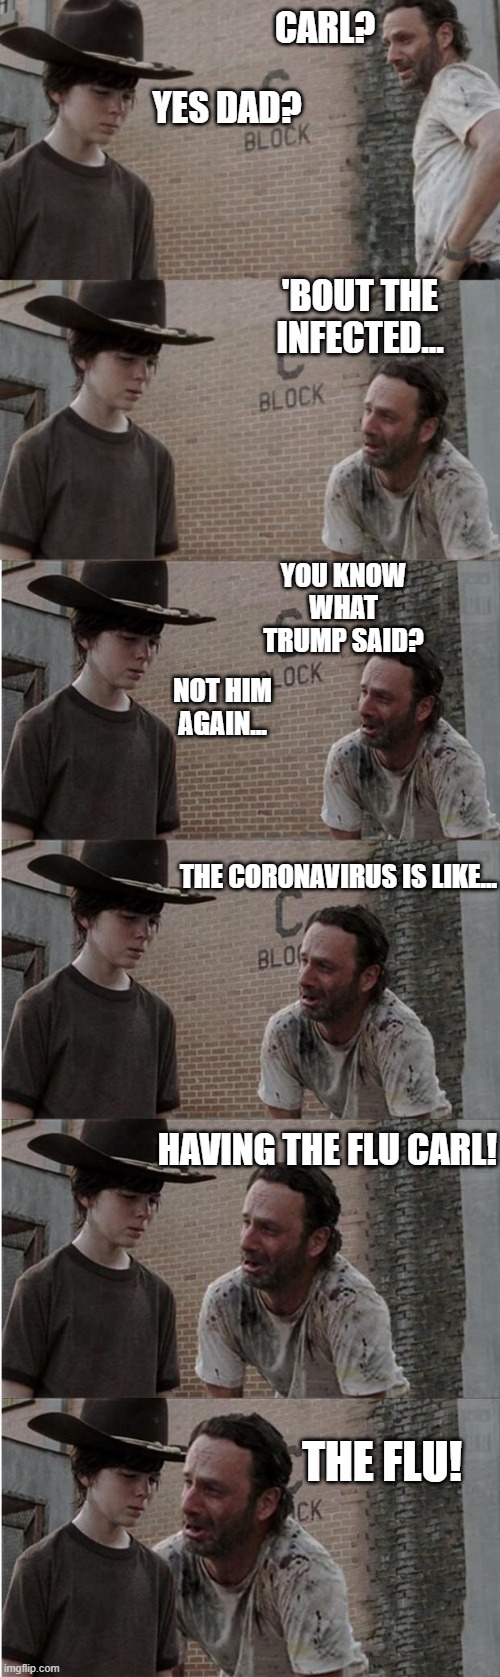 Rick and Carl Longer Meme | CARL? YES DAD? 'BOUT THE INFECTED... YOU KNOW WHAT TRUMP SAID? NOT HIM AGAIN... THE CORONAVIRUS IS LIKE... HAVING THE FLU CARL! THE FLU! | image tagged in memes,rick and carl longer | made w/ Imgflip meme maker